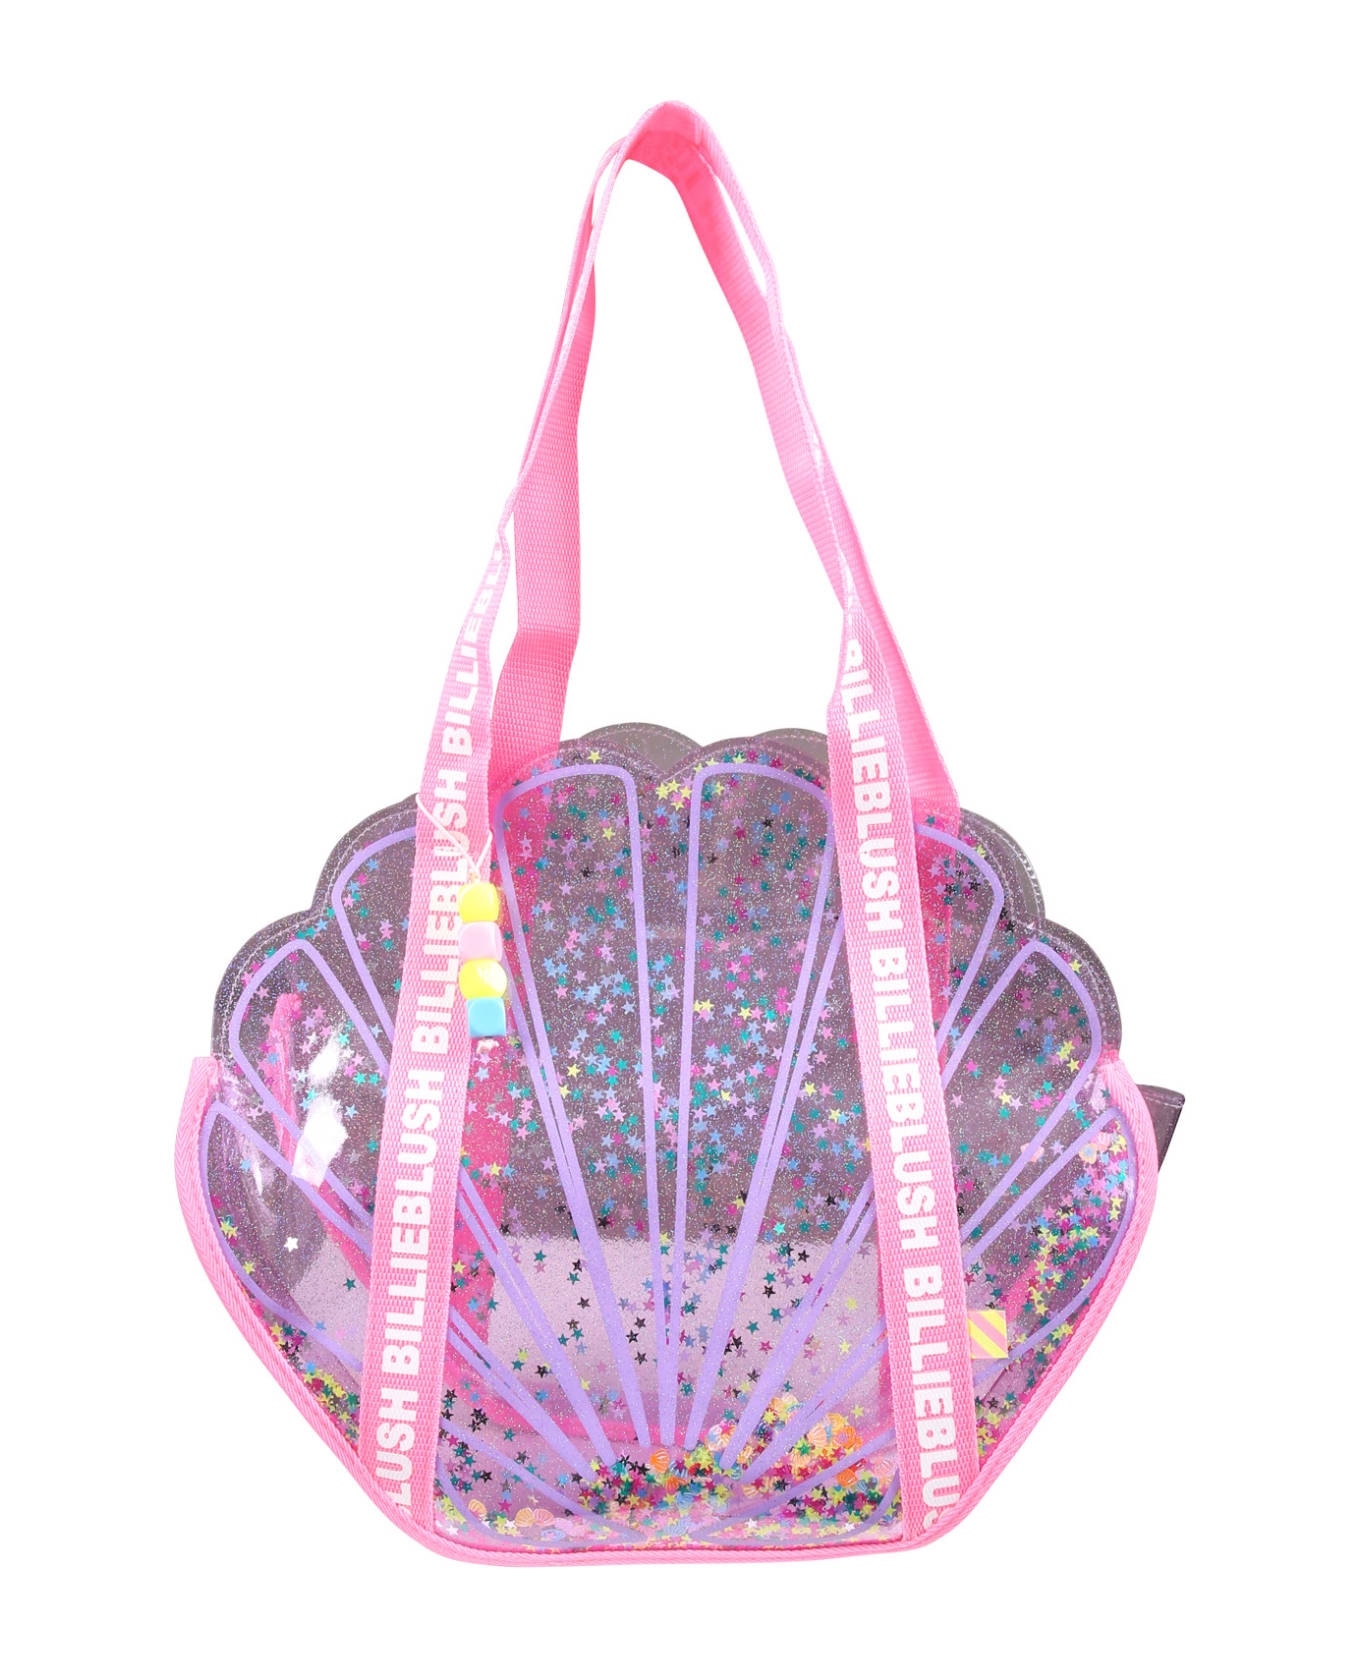 Billieblush Purple Bag For Girl With Stars - Violet アクセサリー＆ギフト